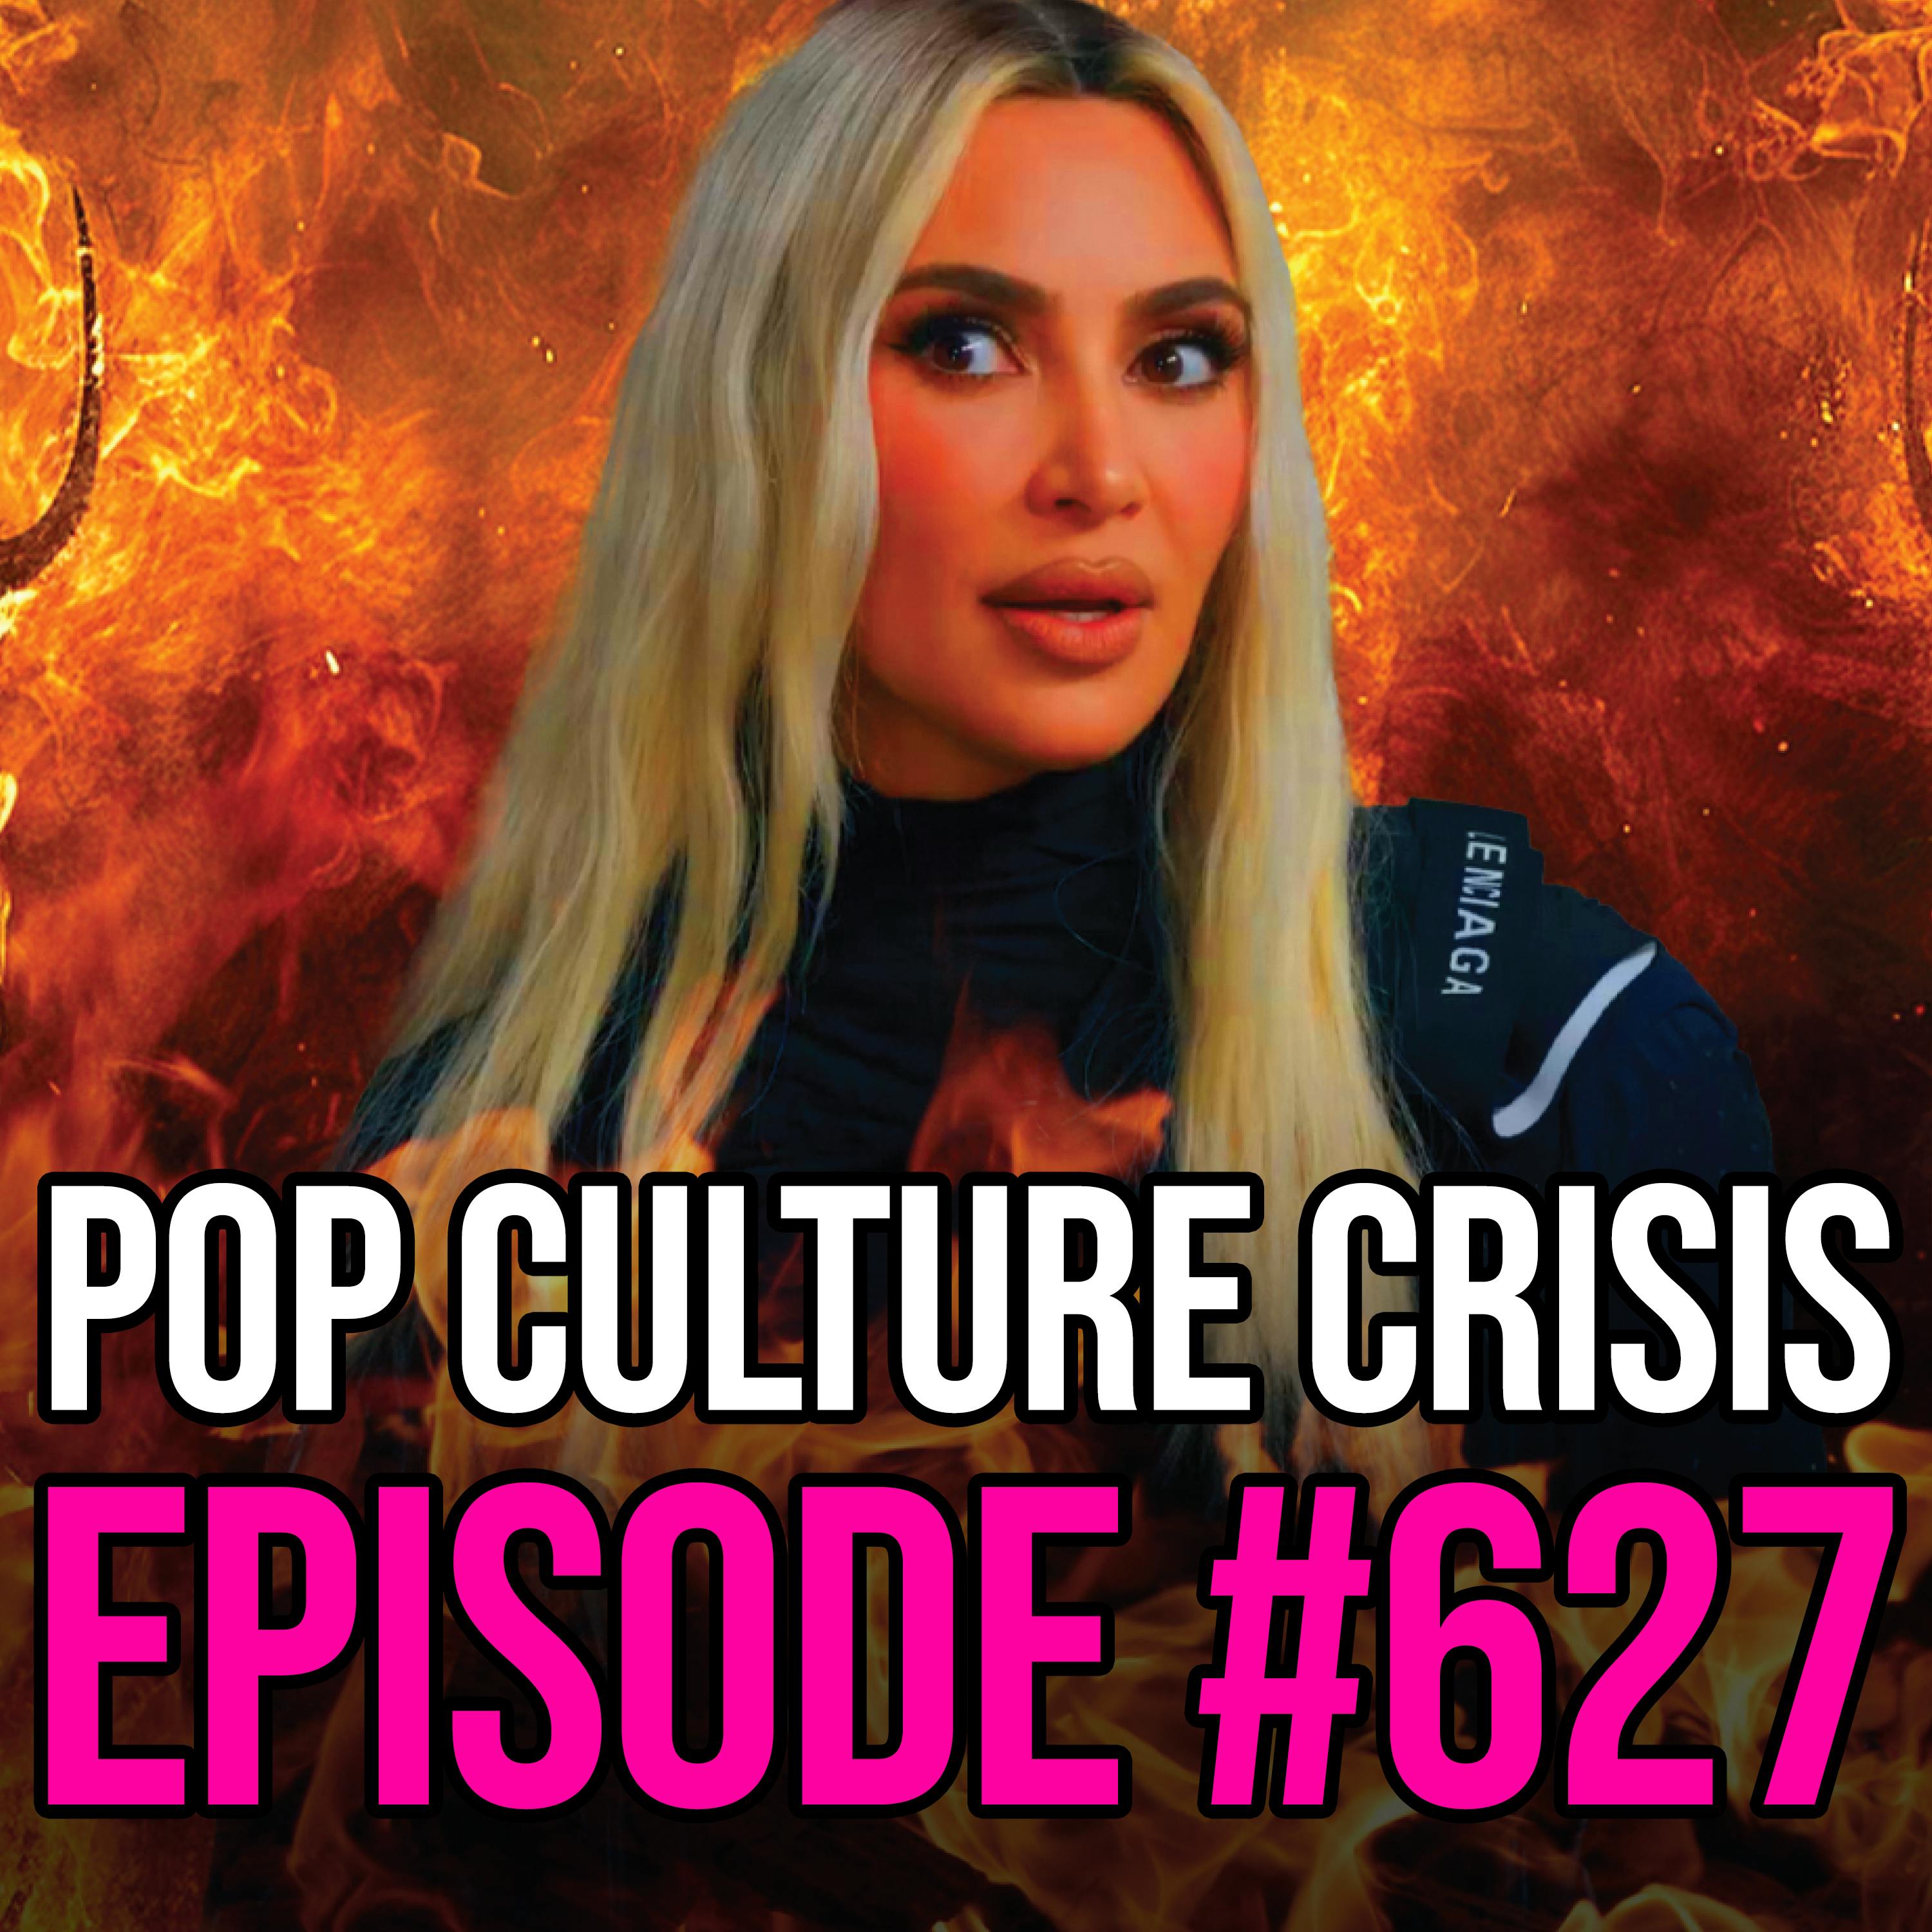 EPISODE 627: Kim K Gets Roasted, Brad Pitt SHUNNED by Kids, Elliot Page Teaches About Gay Wildlife